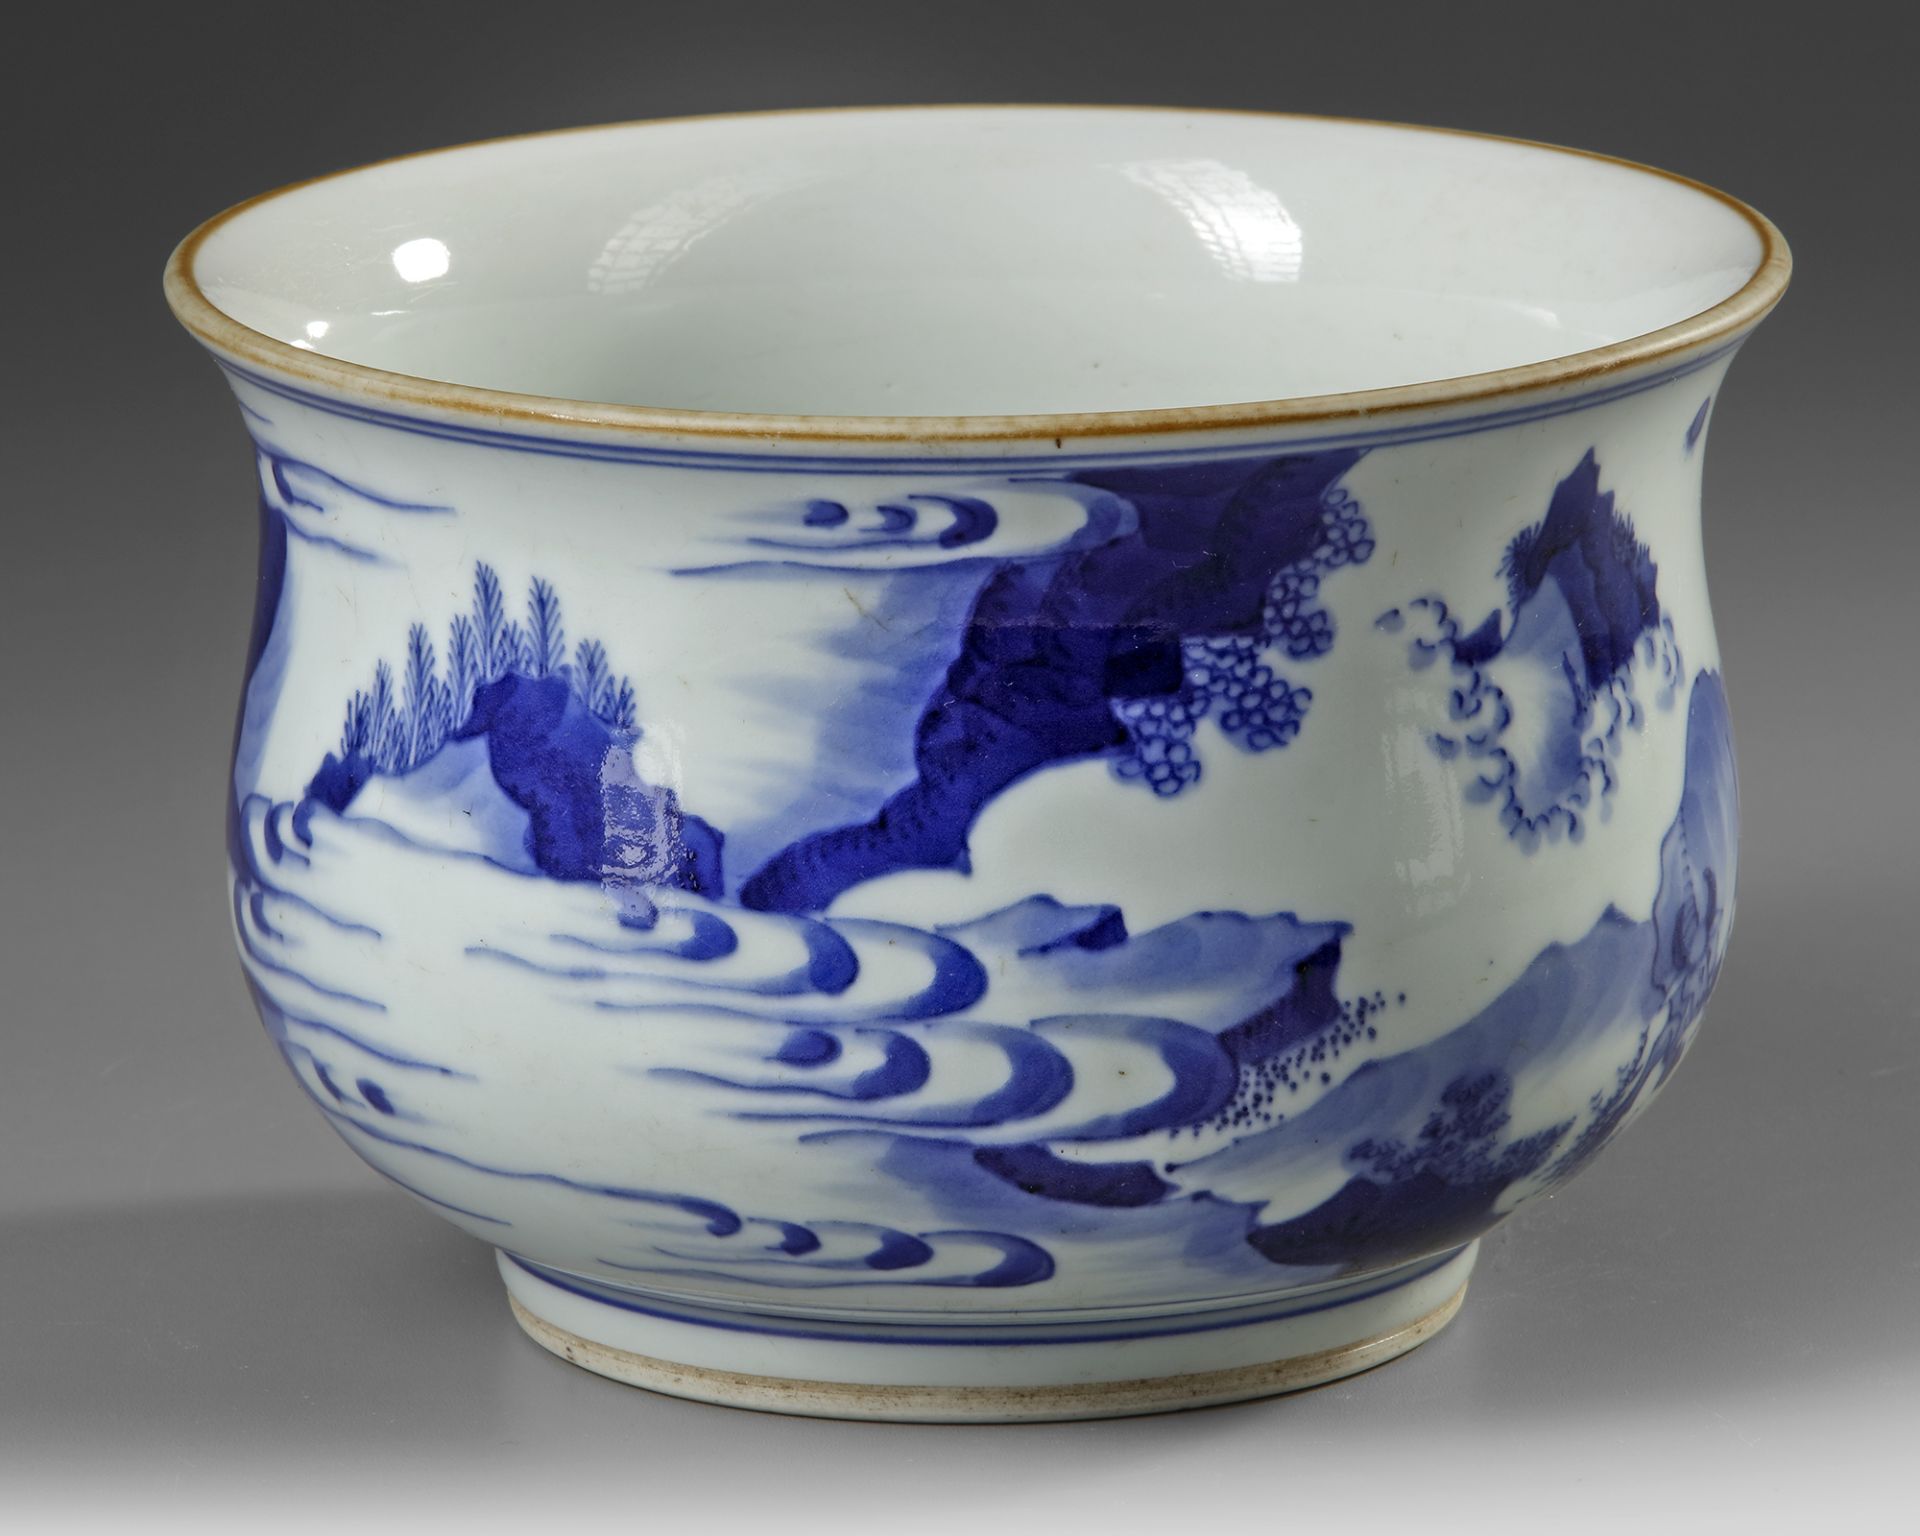 A CHINESE BLUE AND WHITE BOWL, QING DYNASTY (1662-1912) - Image 2 of 4